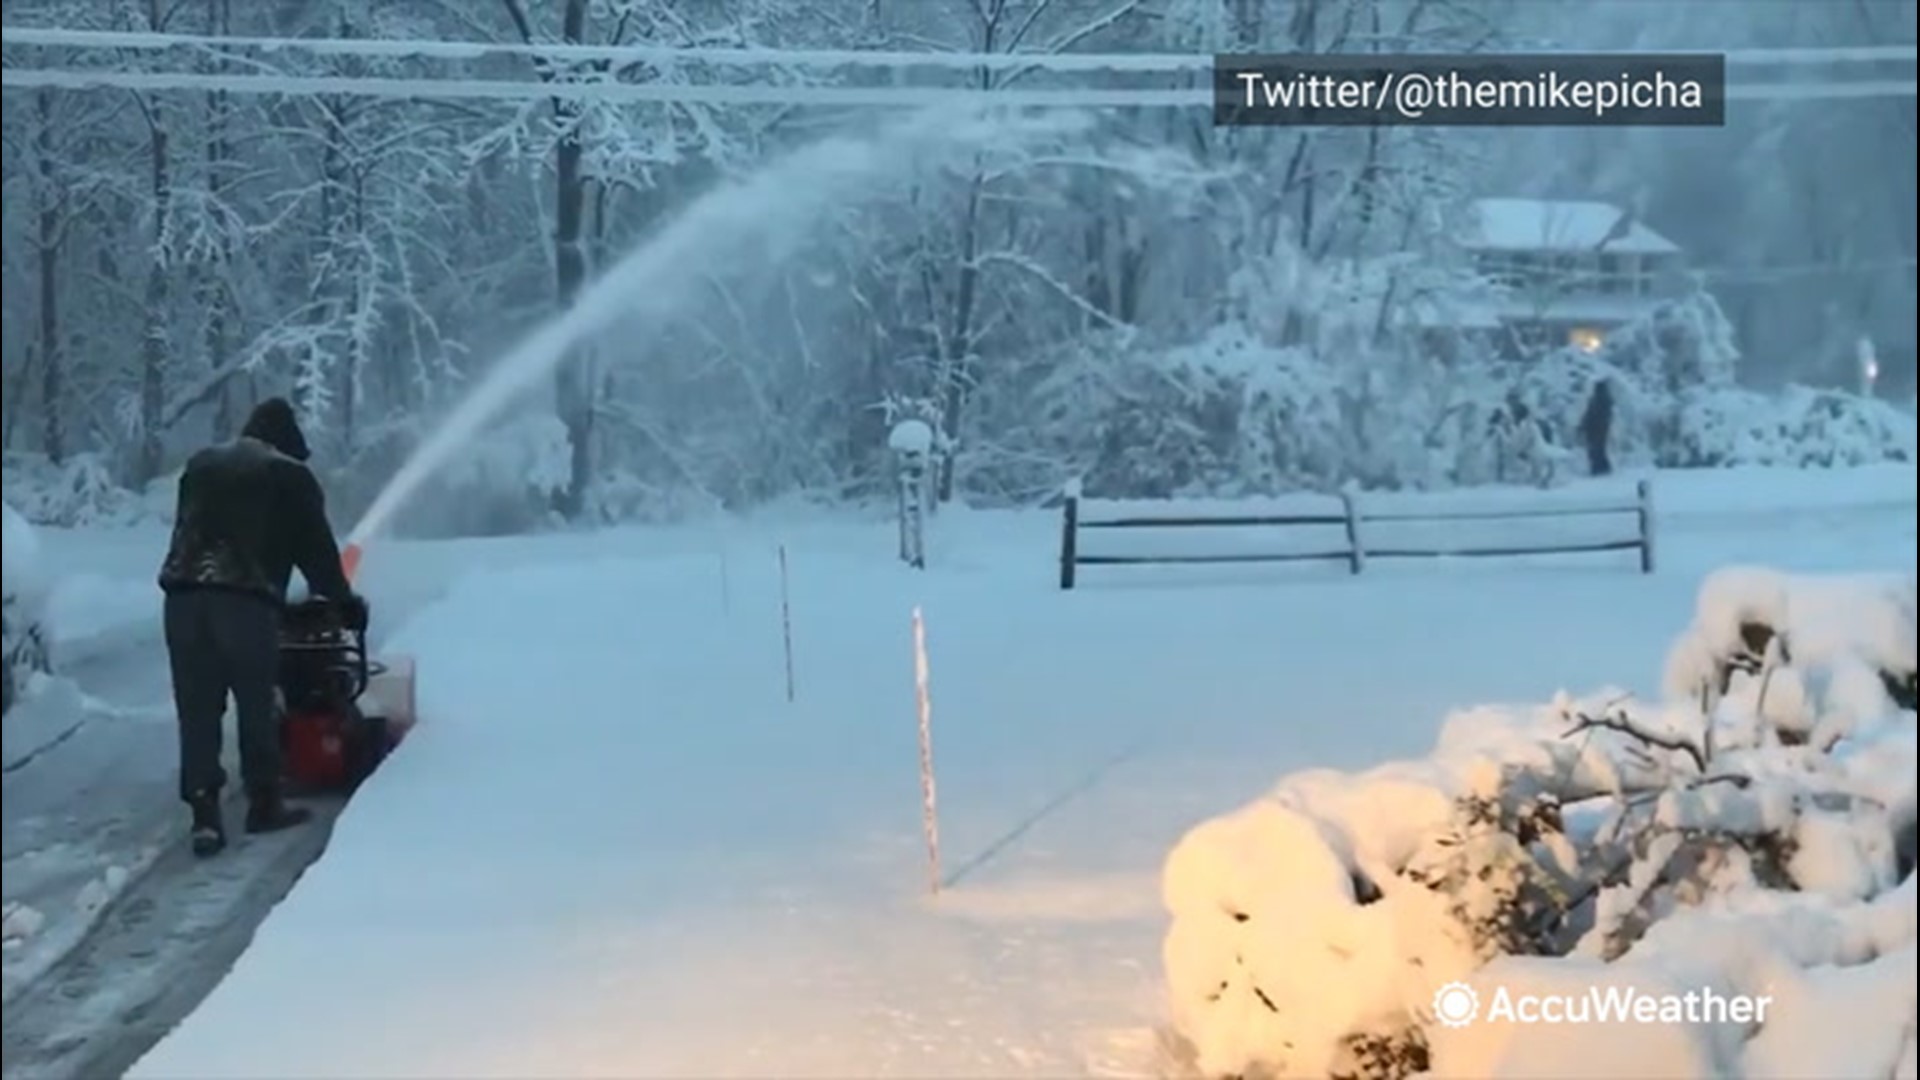 Residents used snow blowers to clear snow in Geauga County, Ohio, on Dec. 1, as a winter storm swept through the area, dropping several inches of snow.